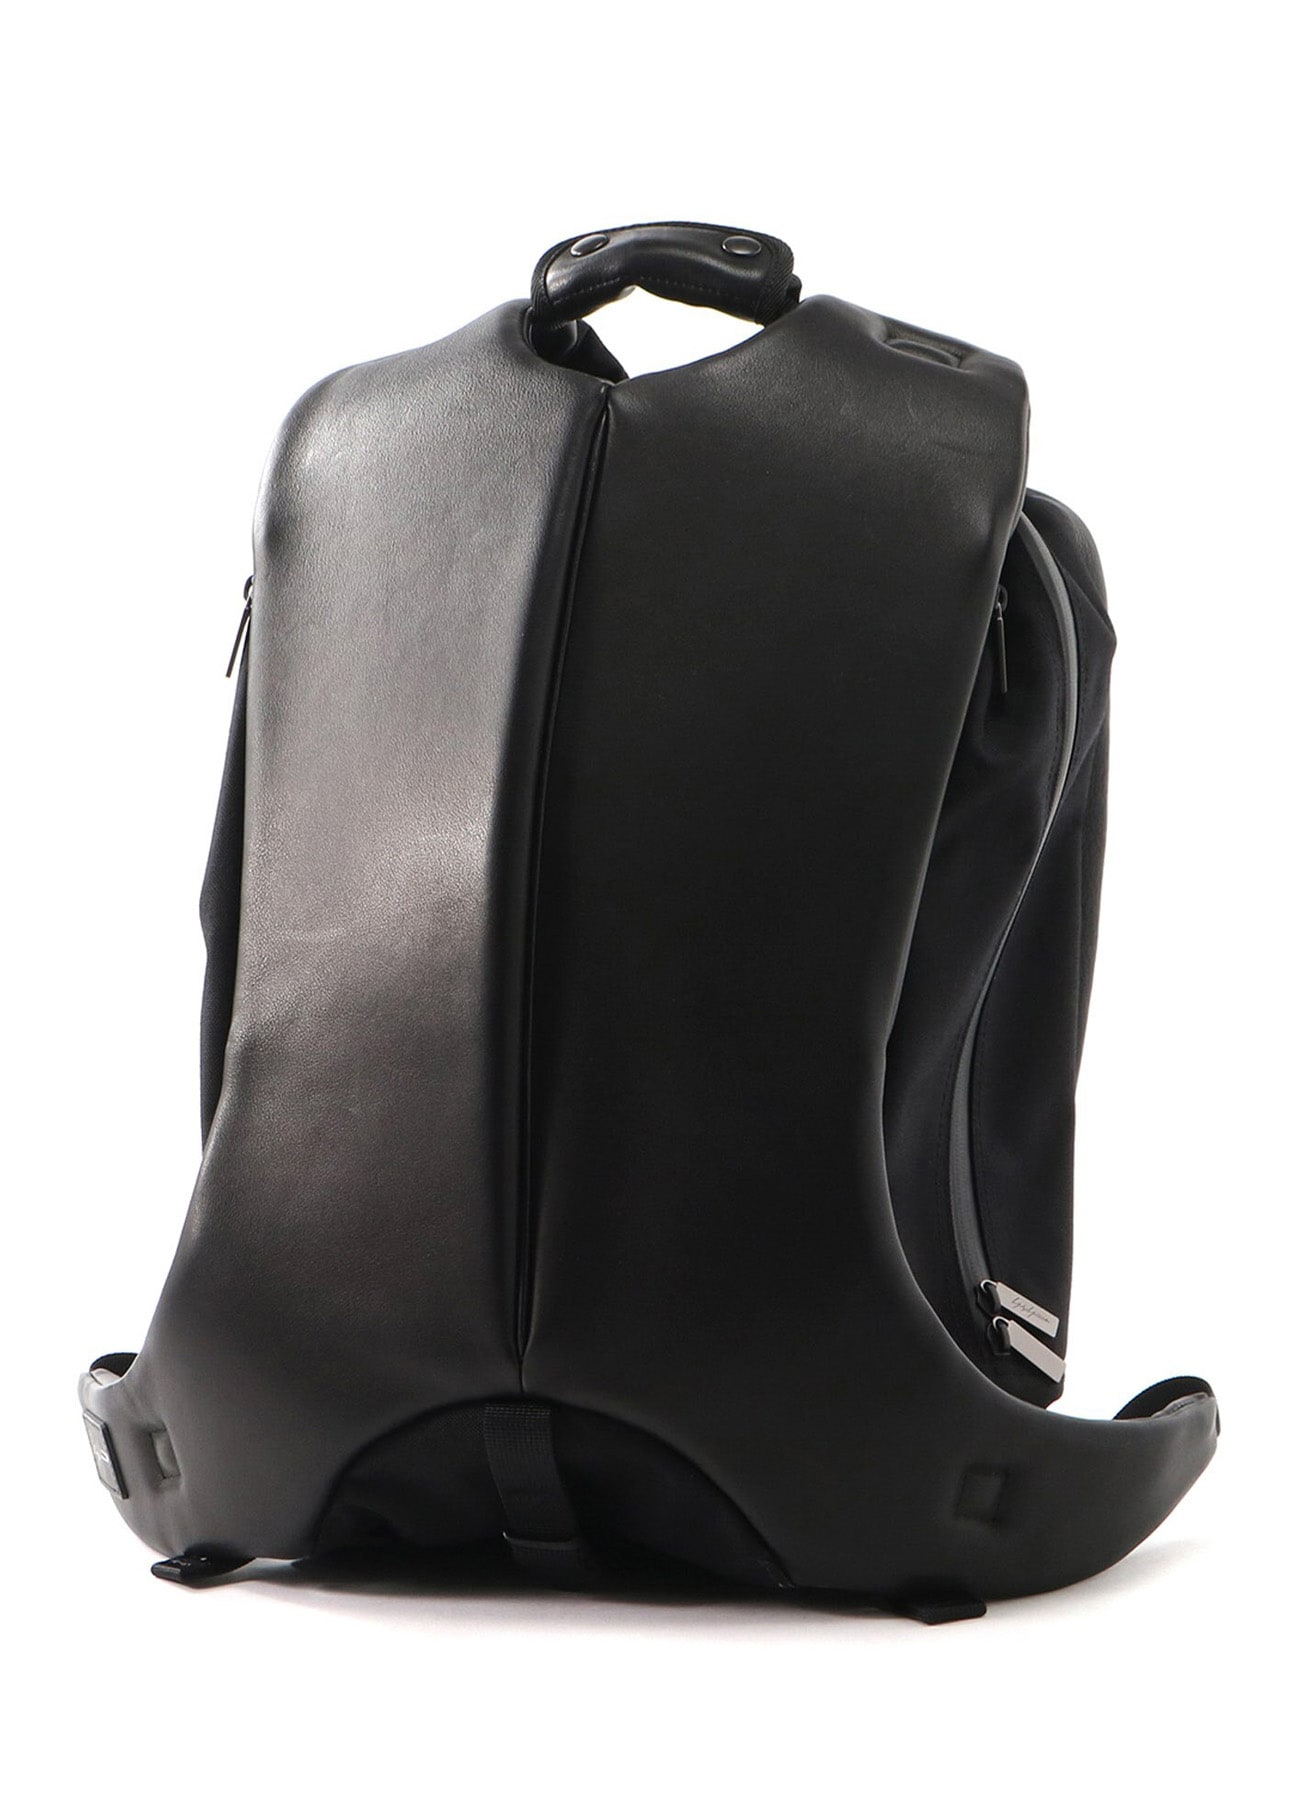 COW LETHER/NYLON 3 SPACE BACKPACK